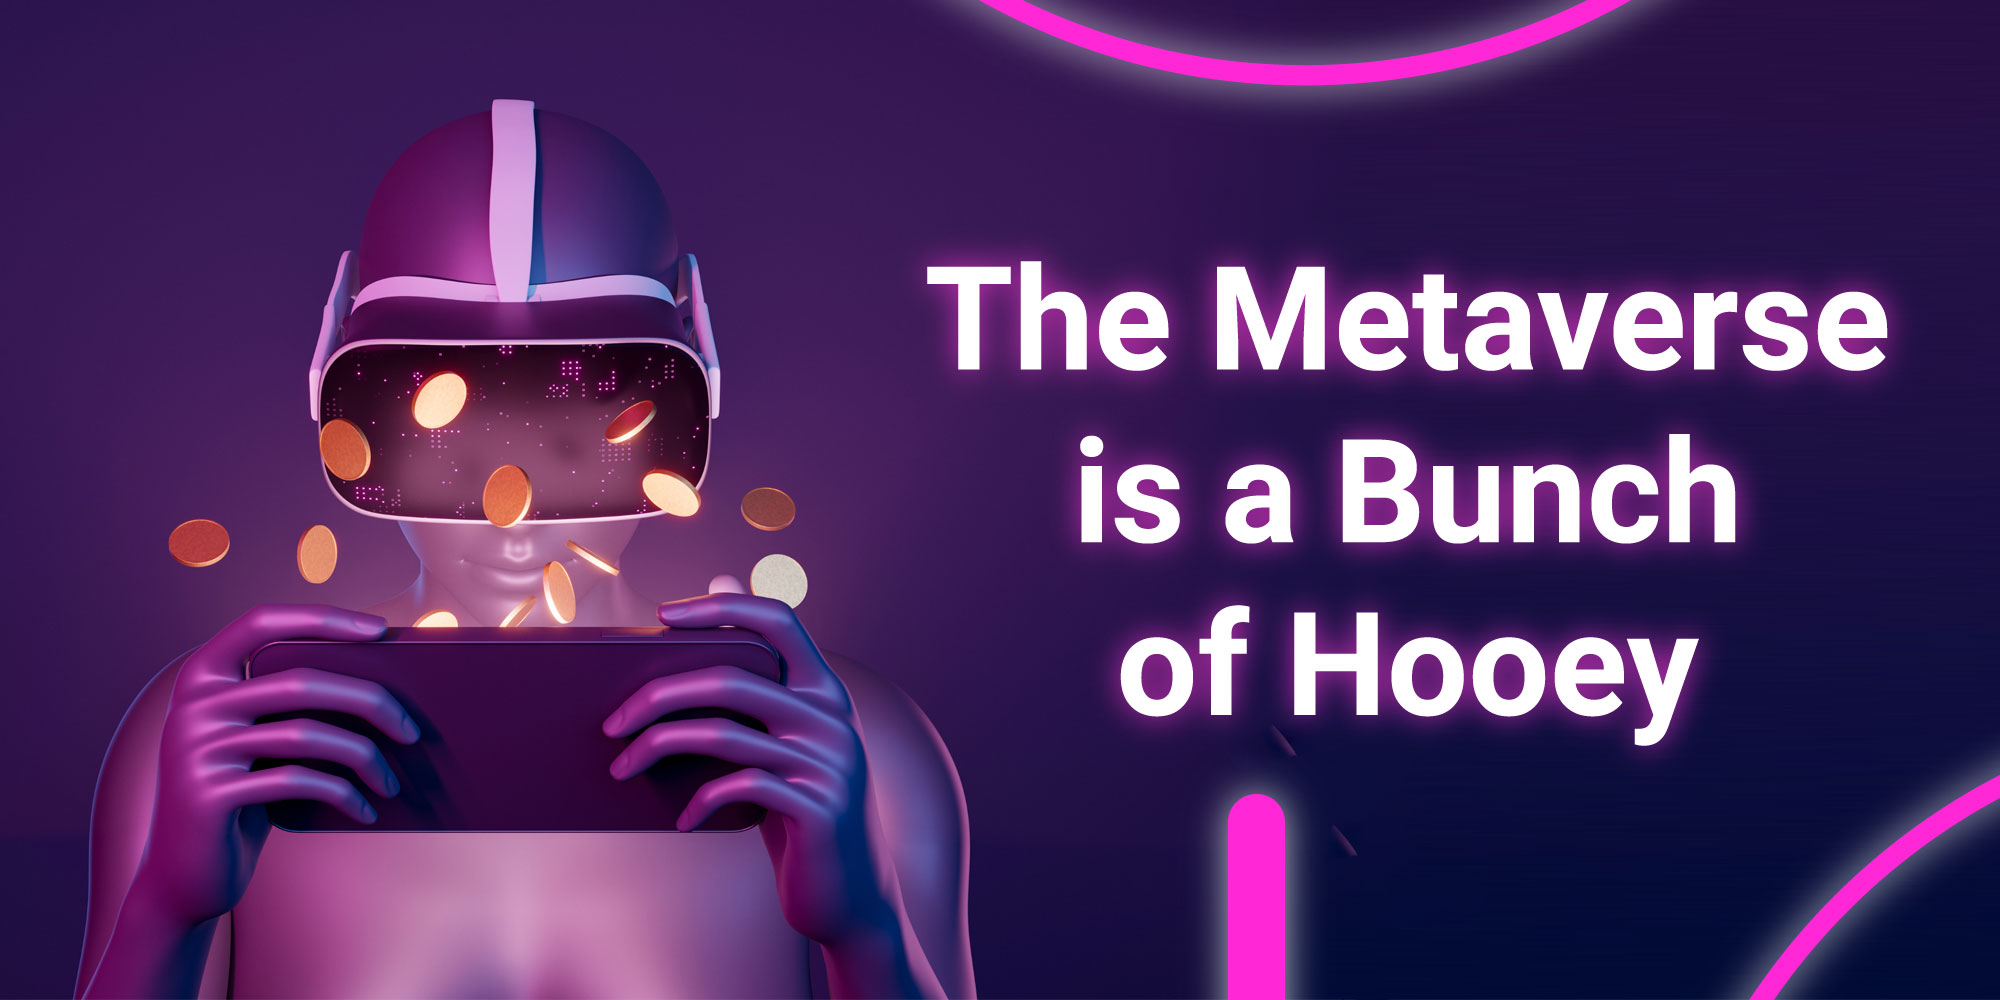 the metaverse is a bunch of hooey